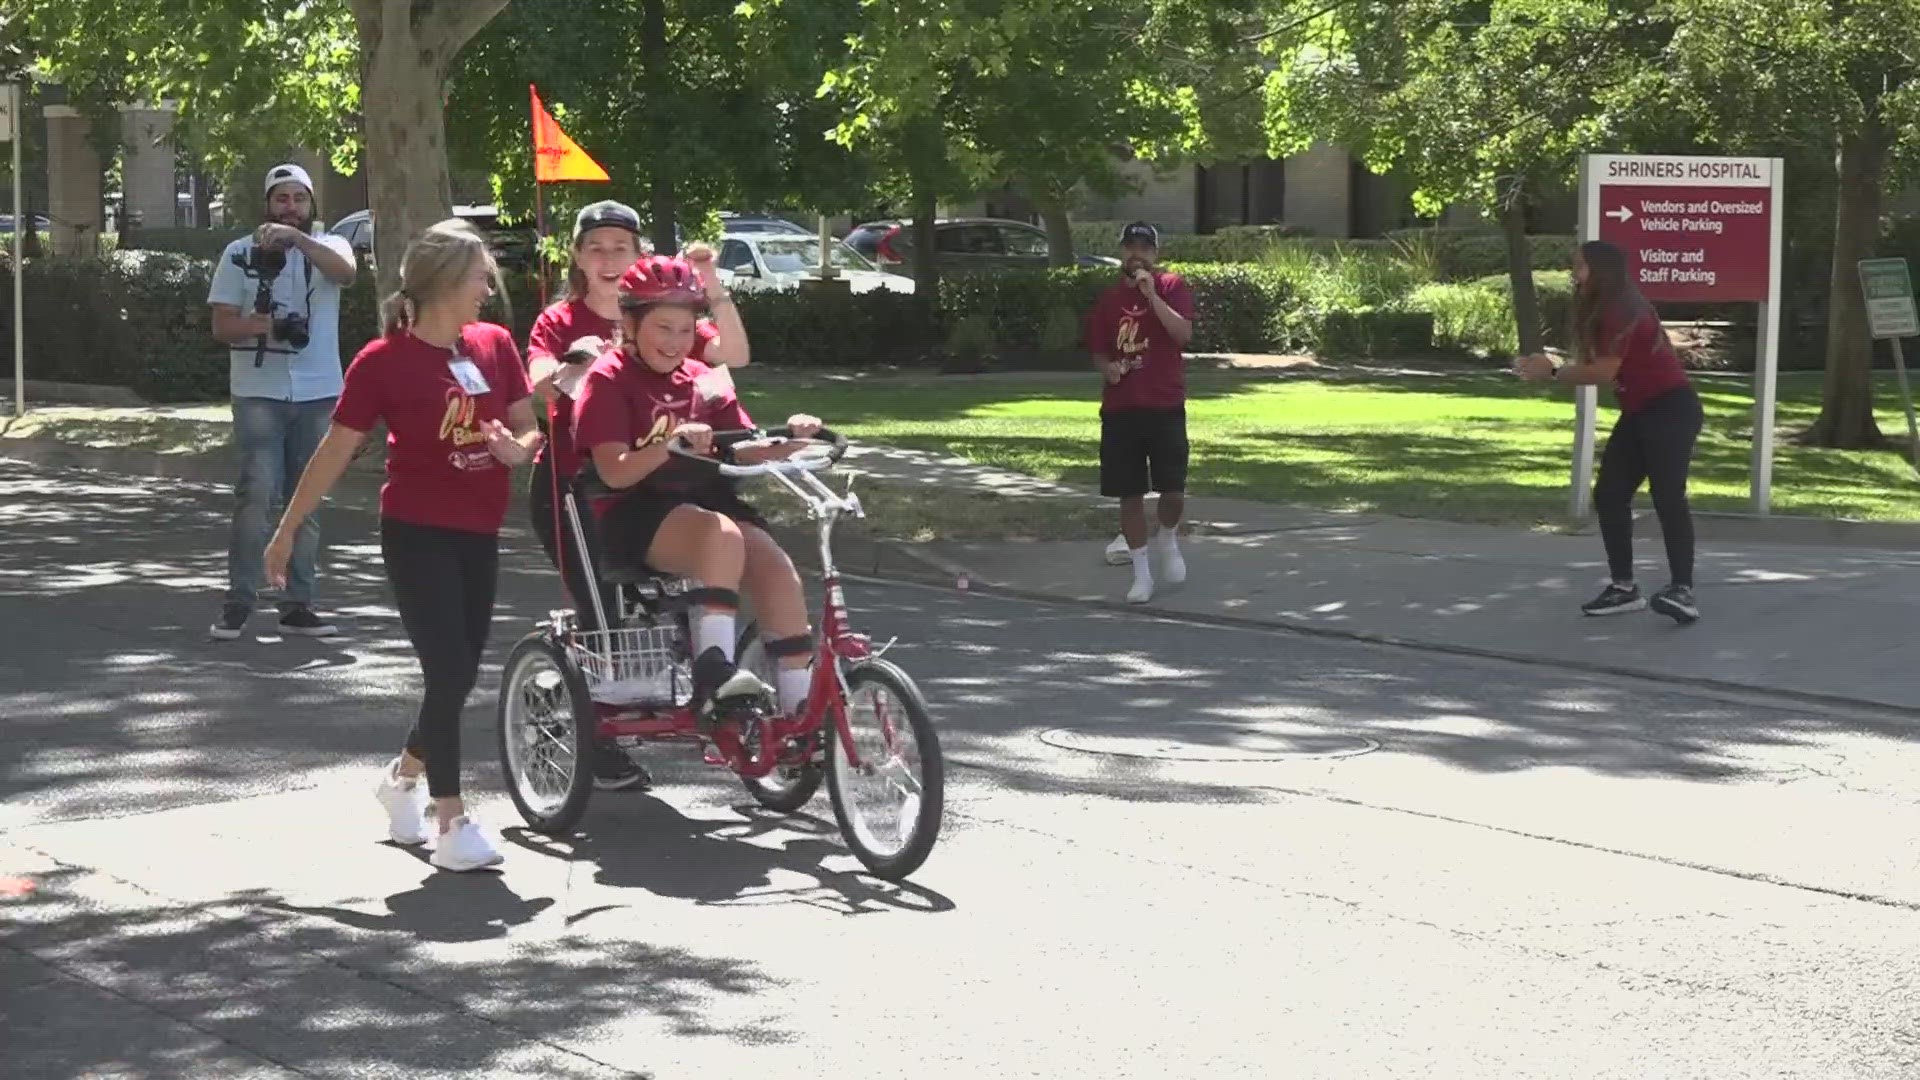 Shriners Hospitals for Children holds a free event to adaptive build bikes for kids